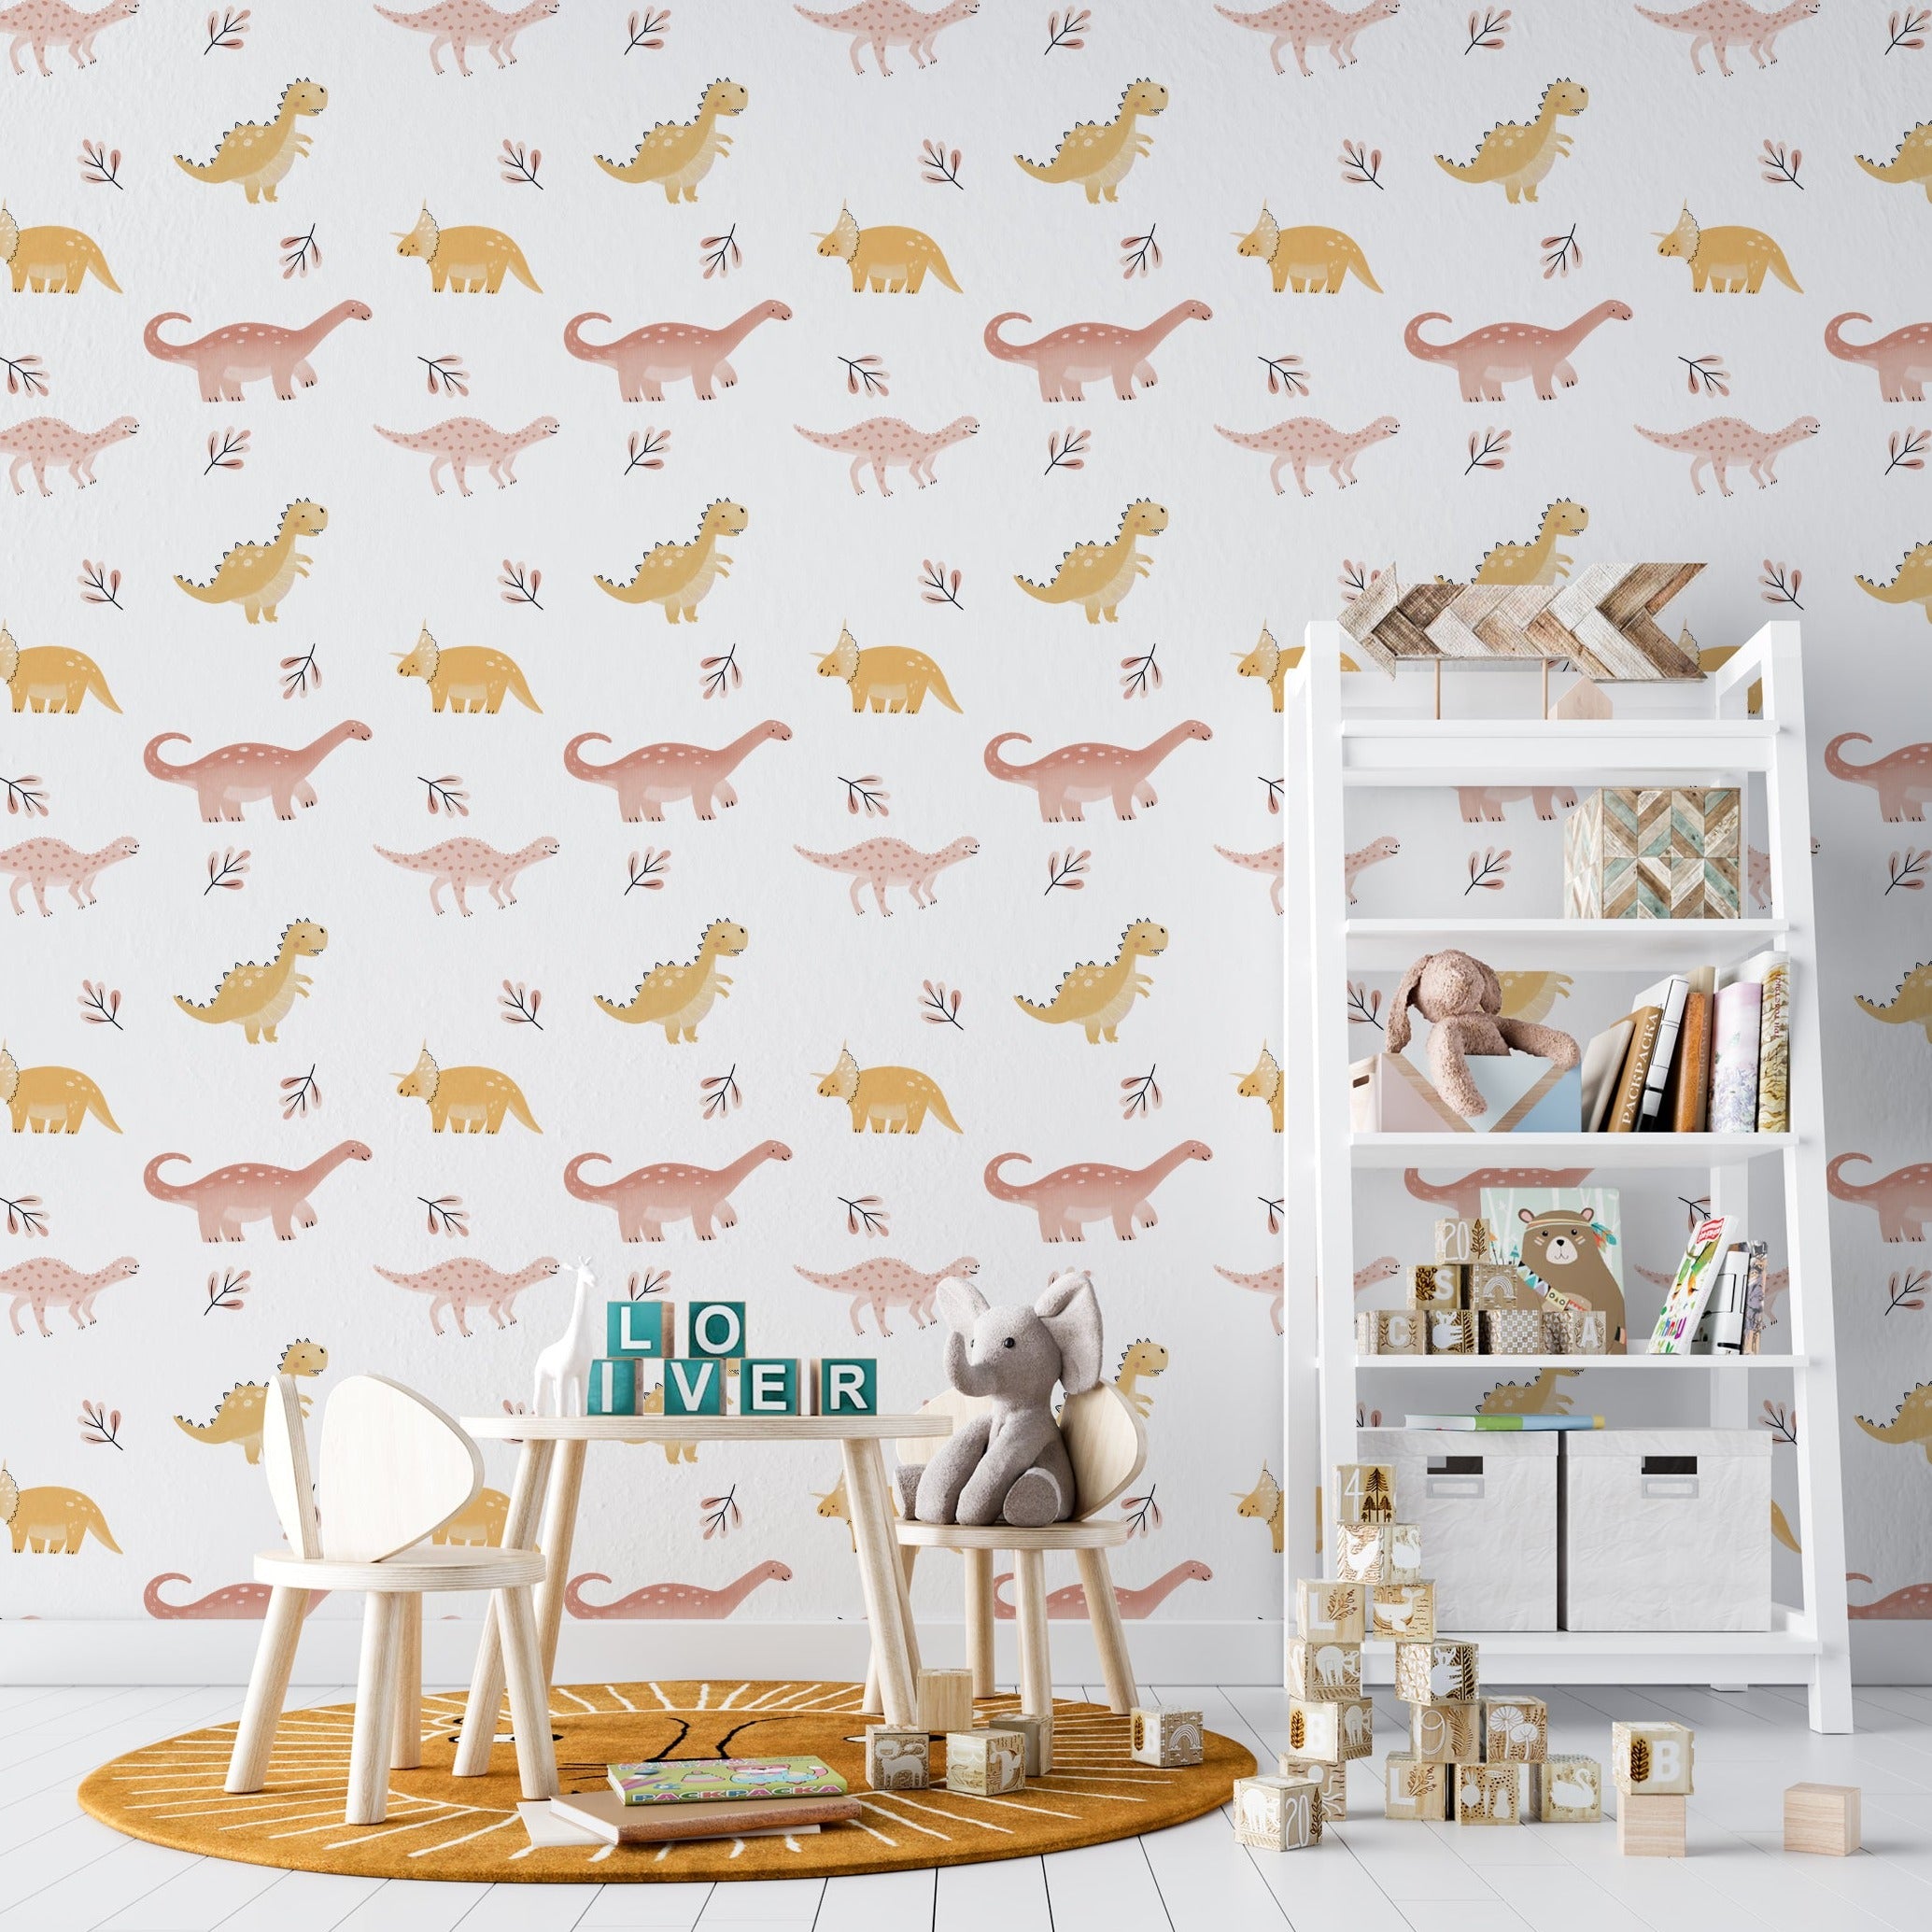 Nursery room featuring 'Dino World Kids Wallpaper' with a pattern of pale pink and yellow dinosaurs and delicate foliage on a white background. The room includes a small children's table and chair set, a white shelf with books and toys, enhancing a cozy and imaginative play space.